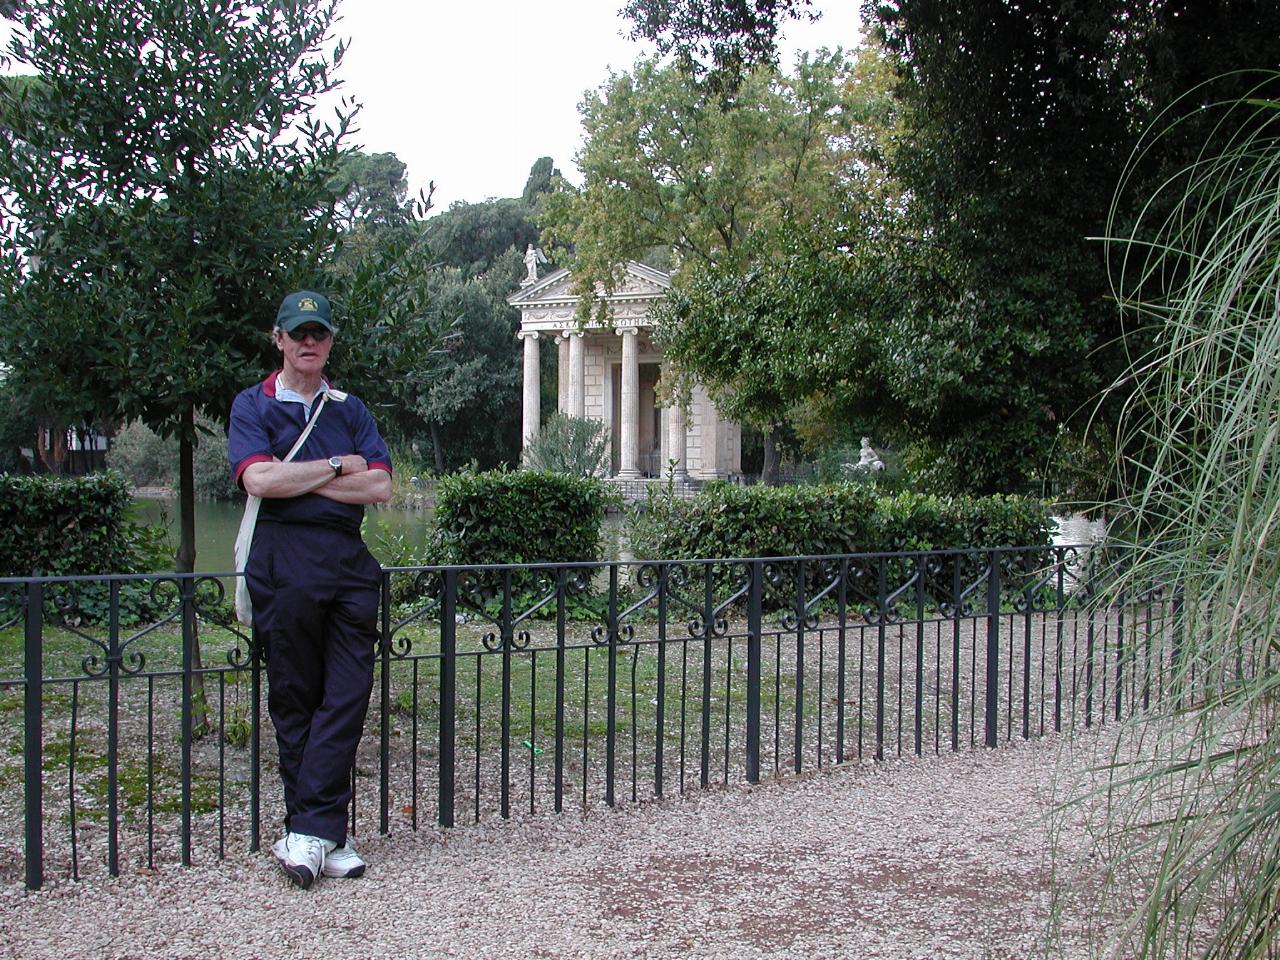 Peter at Villa Borghese in front of Temple of Aesculapius